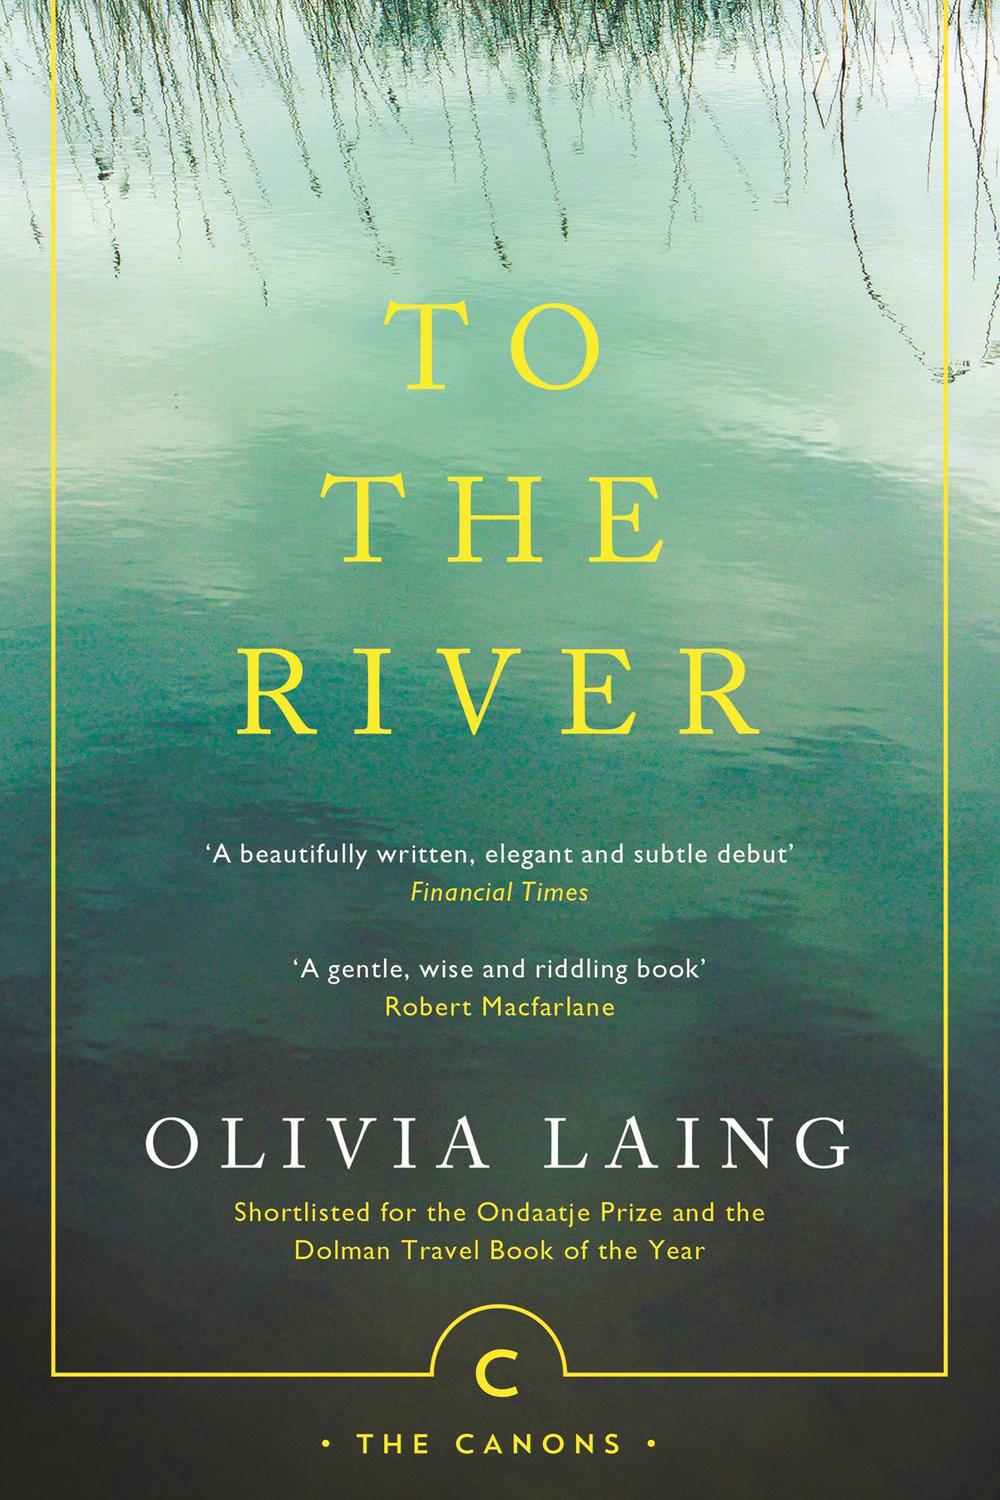 To the River - Olivia Laing